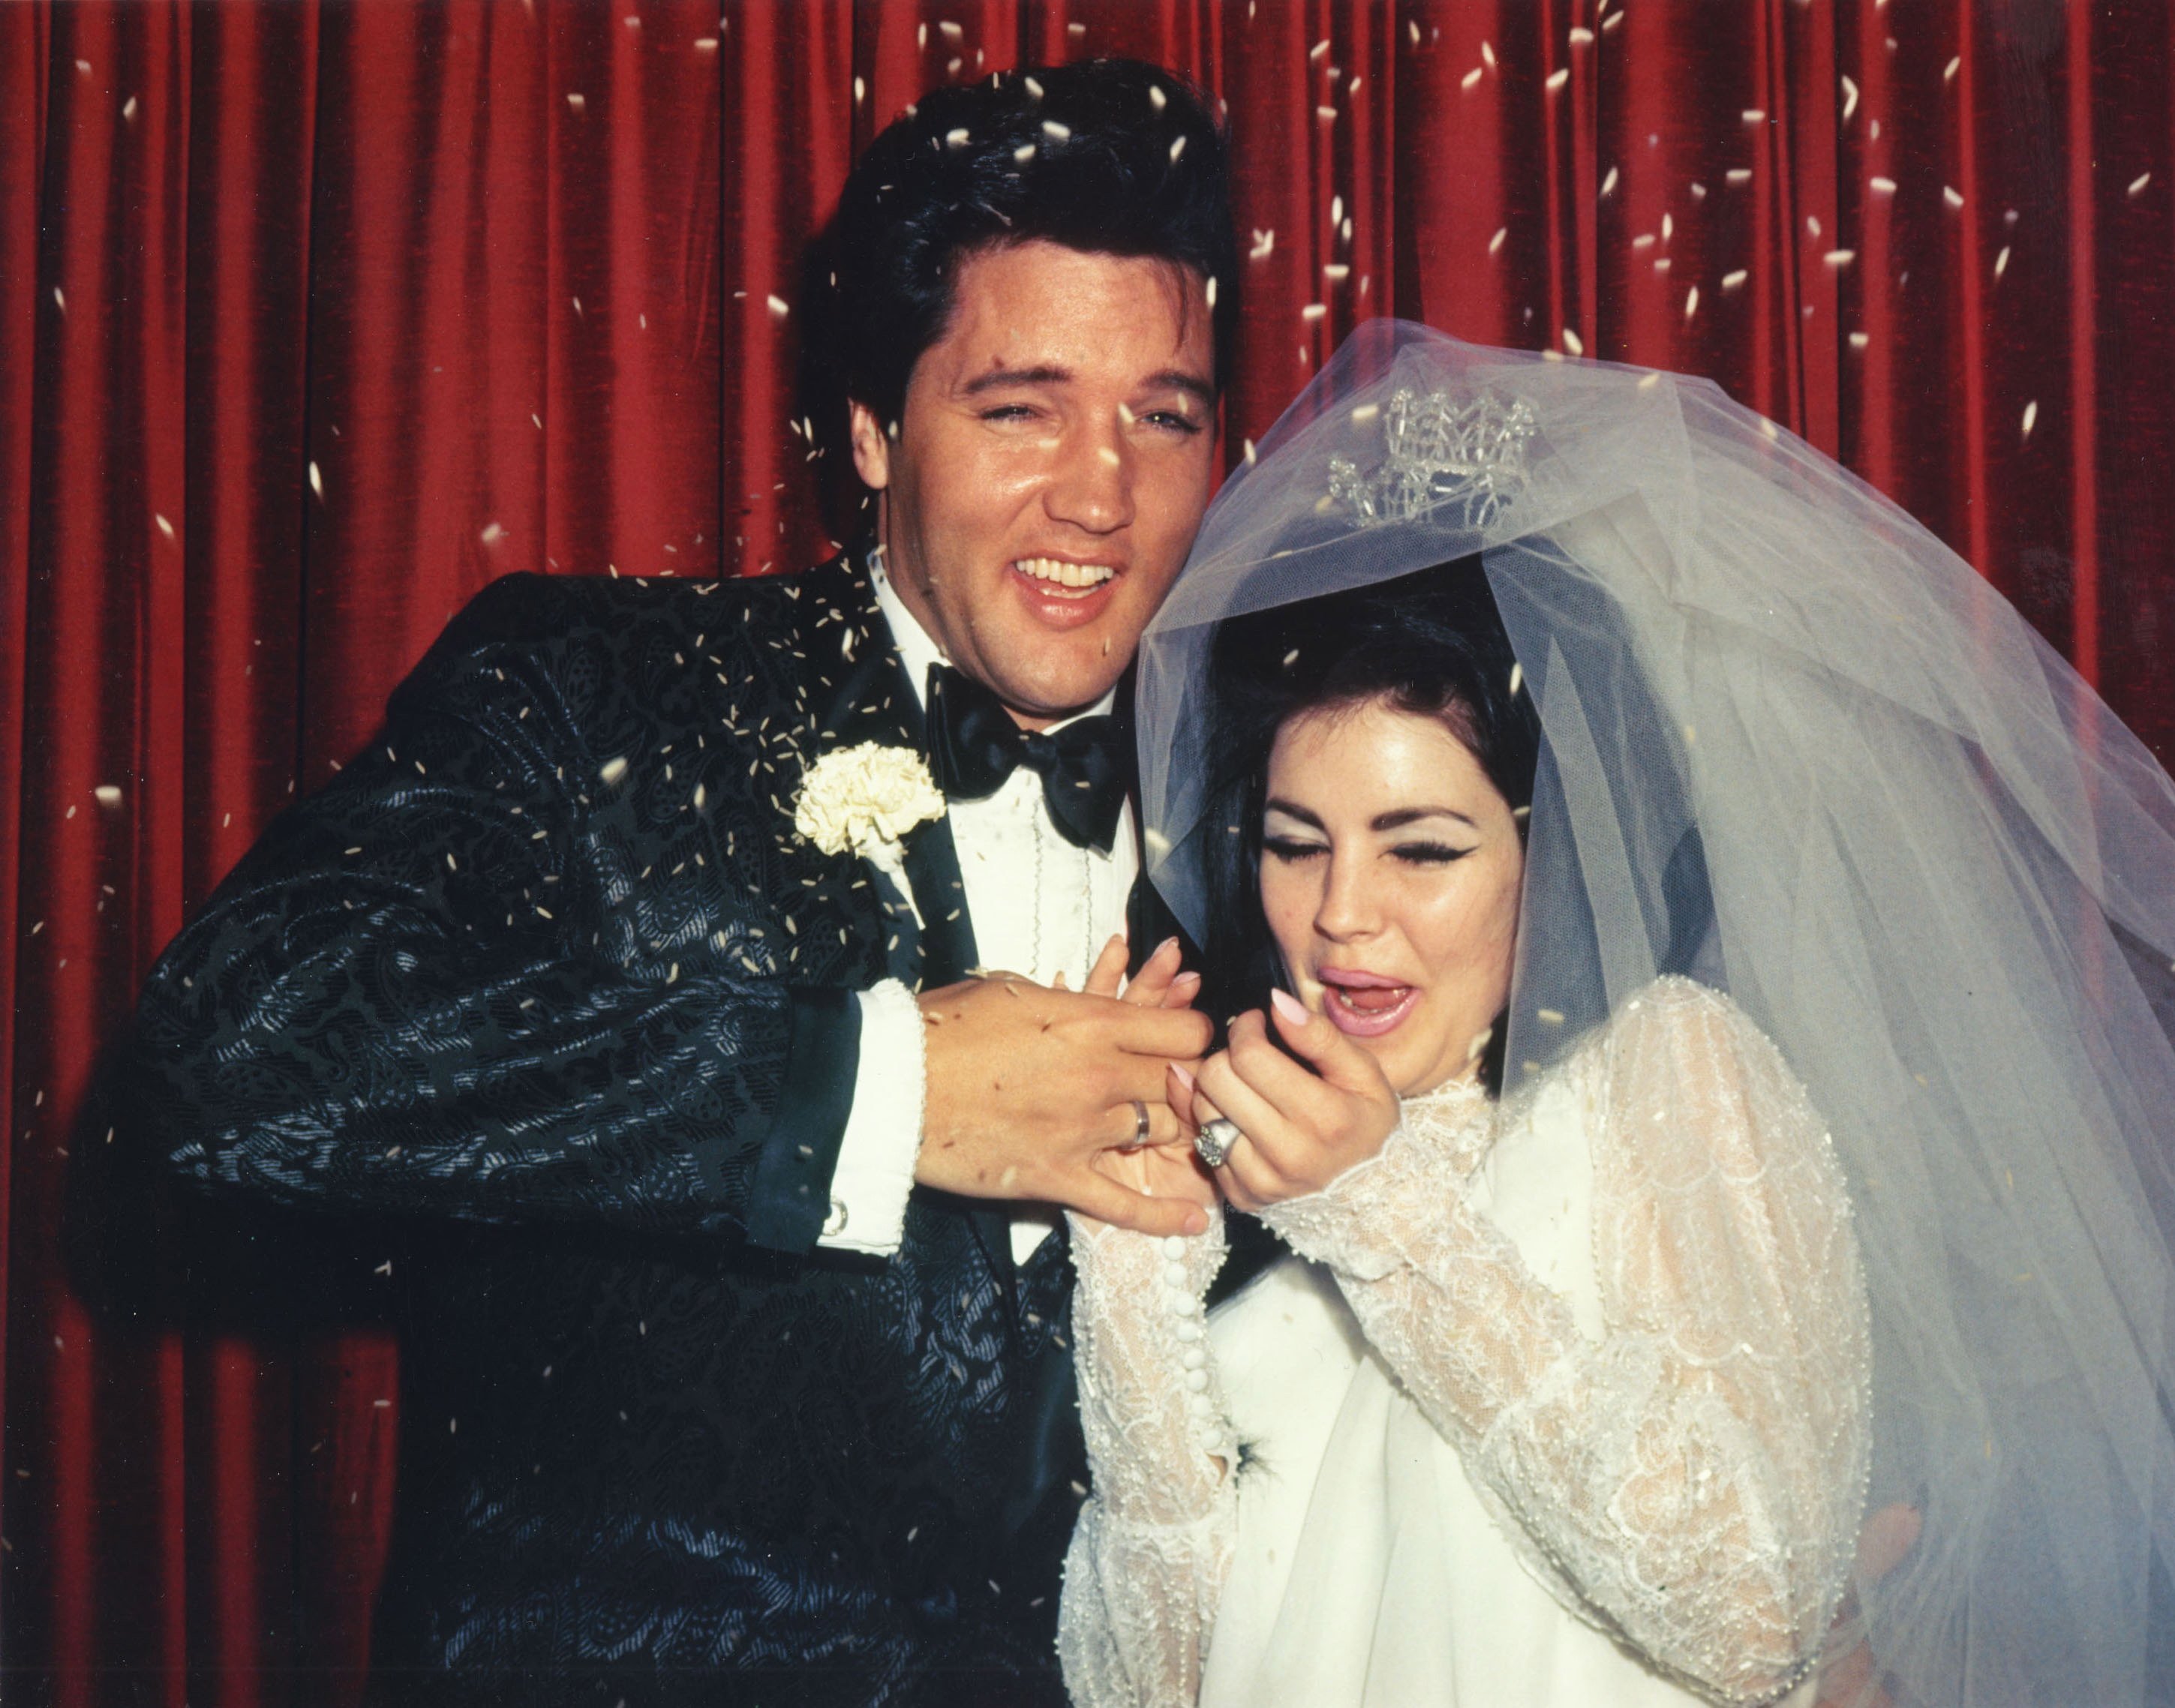 Elvis Presley and Priscilla Presley at their wedding in front of a red curtain